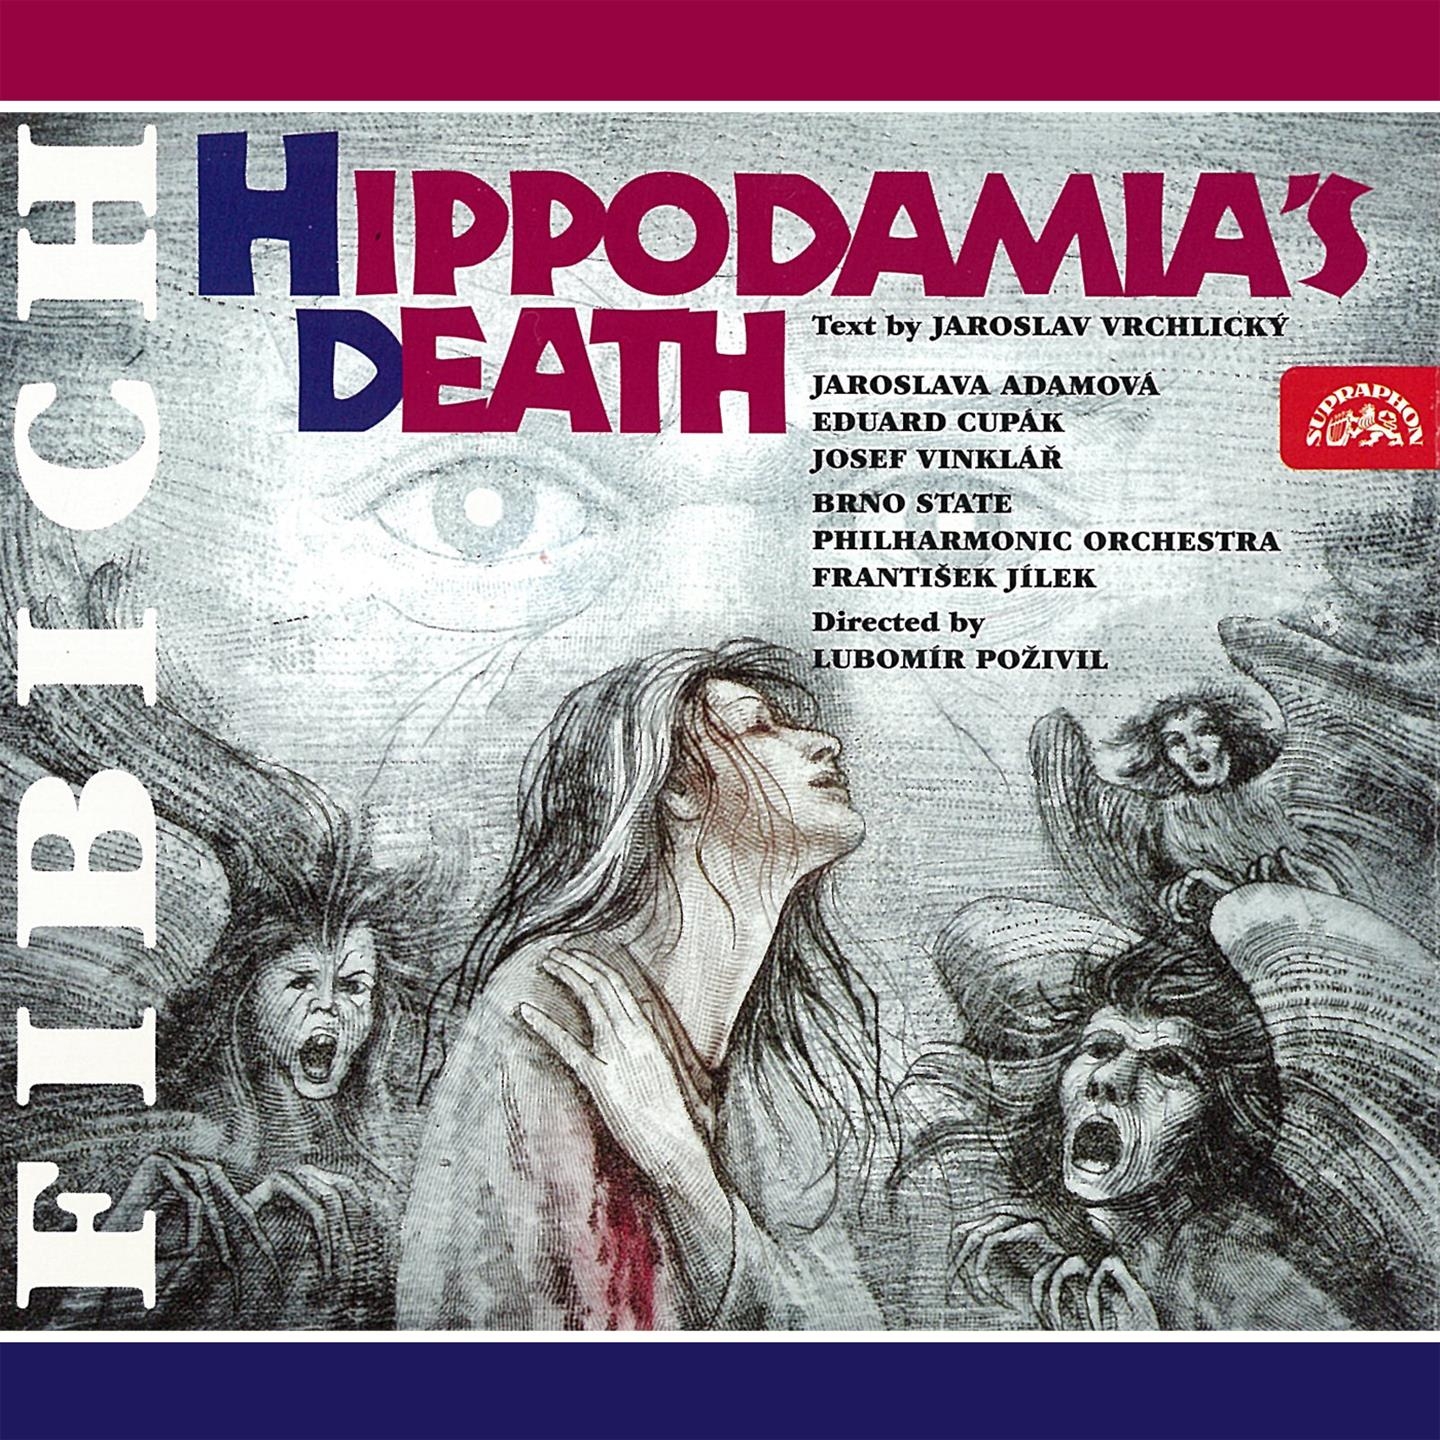 Hippodamia s Death, Op. 33, .: Act 2, Scene 1: So Gather up Your Courage